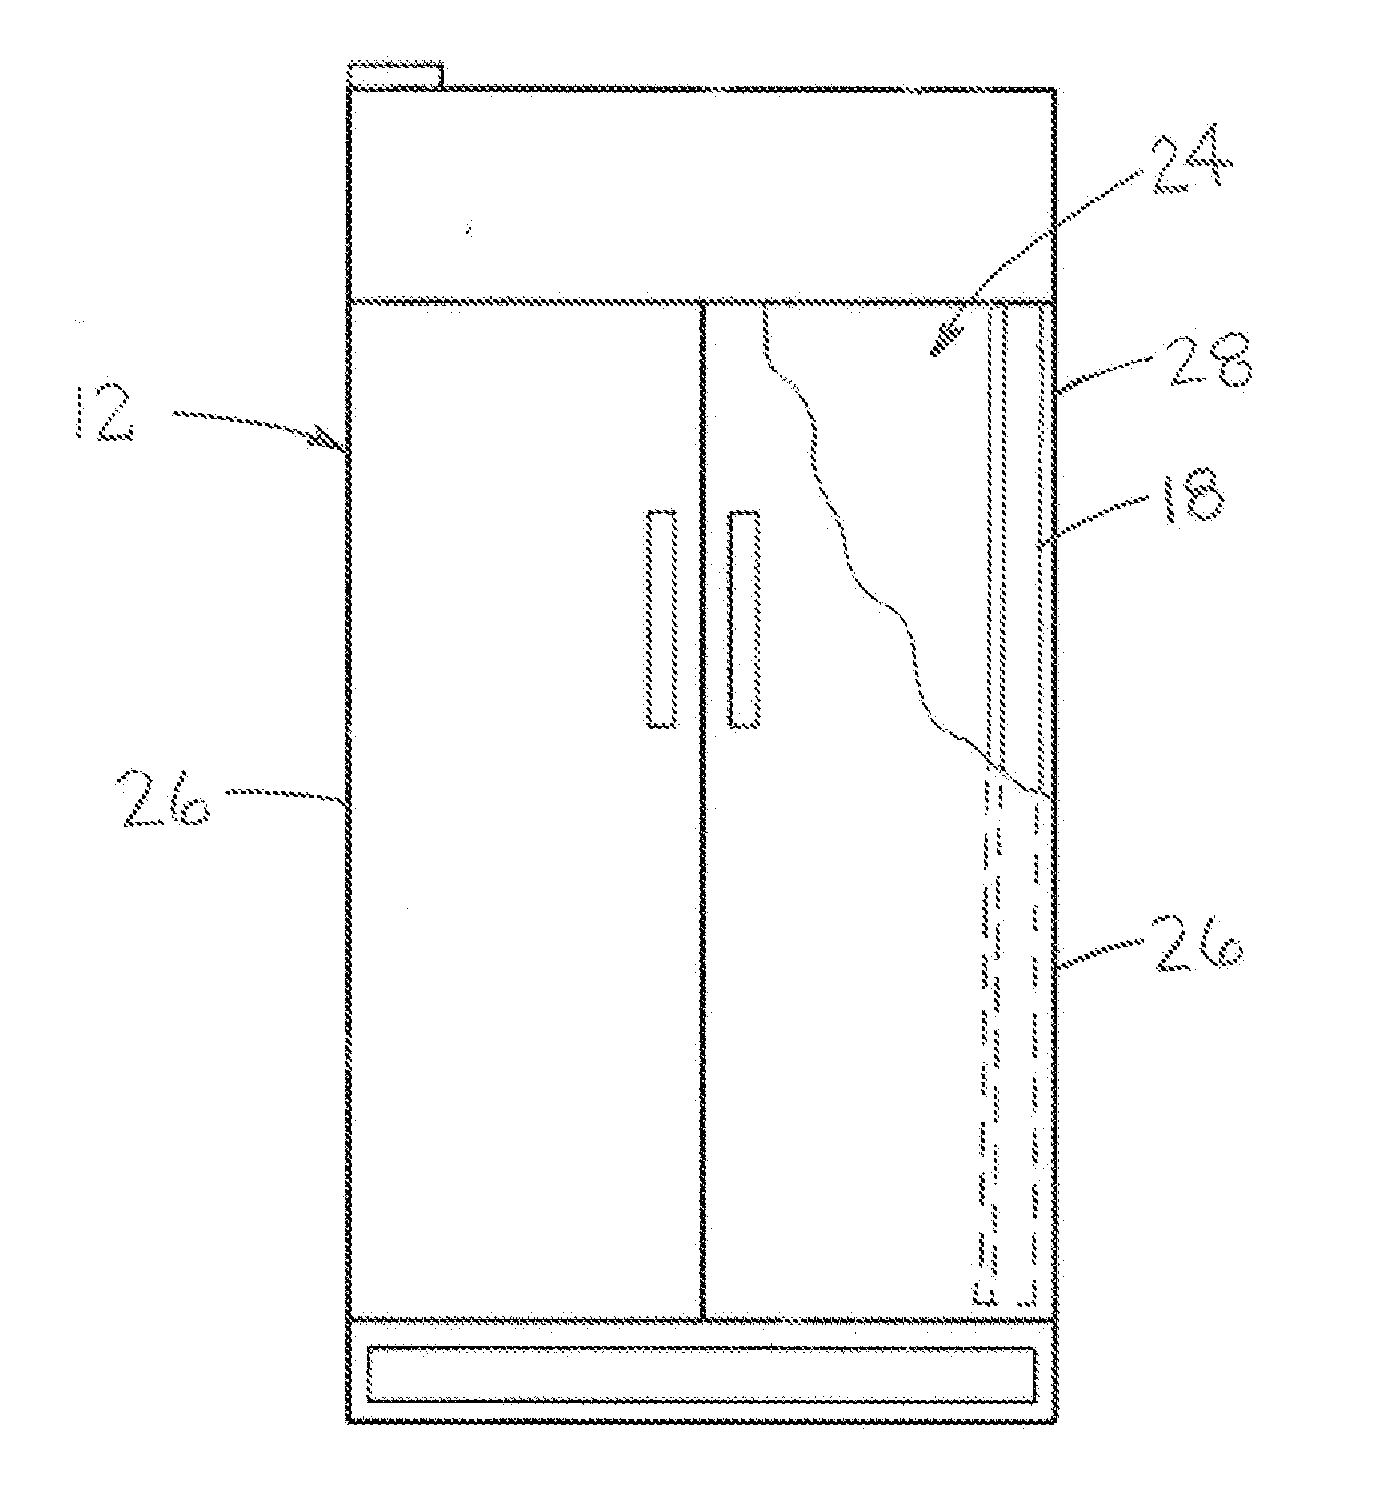 System for Facilitating Communication of Information and Related Methods